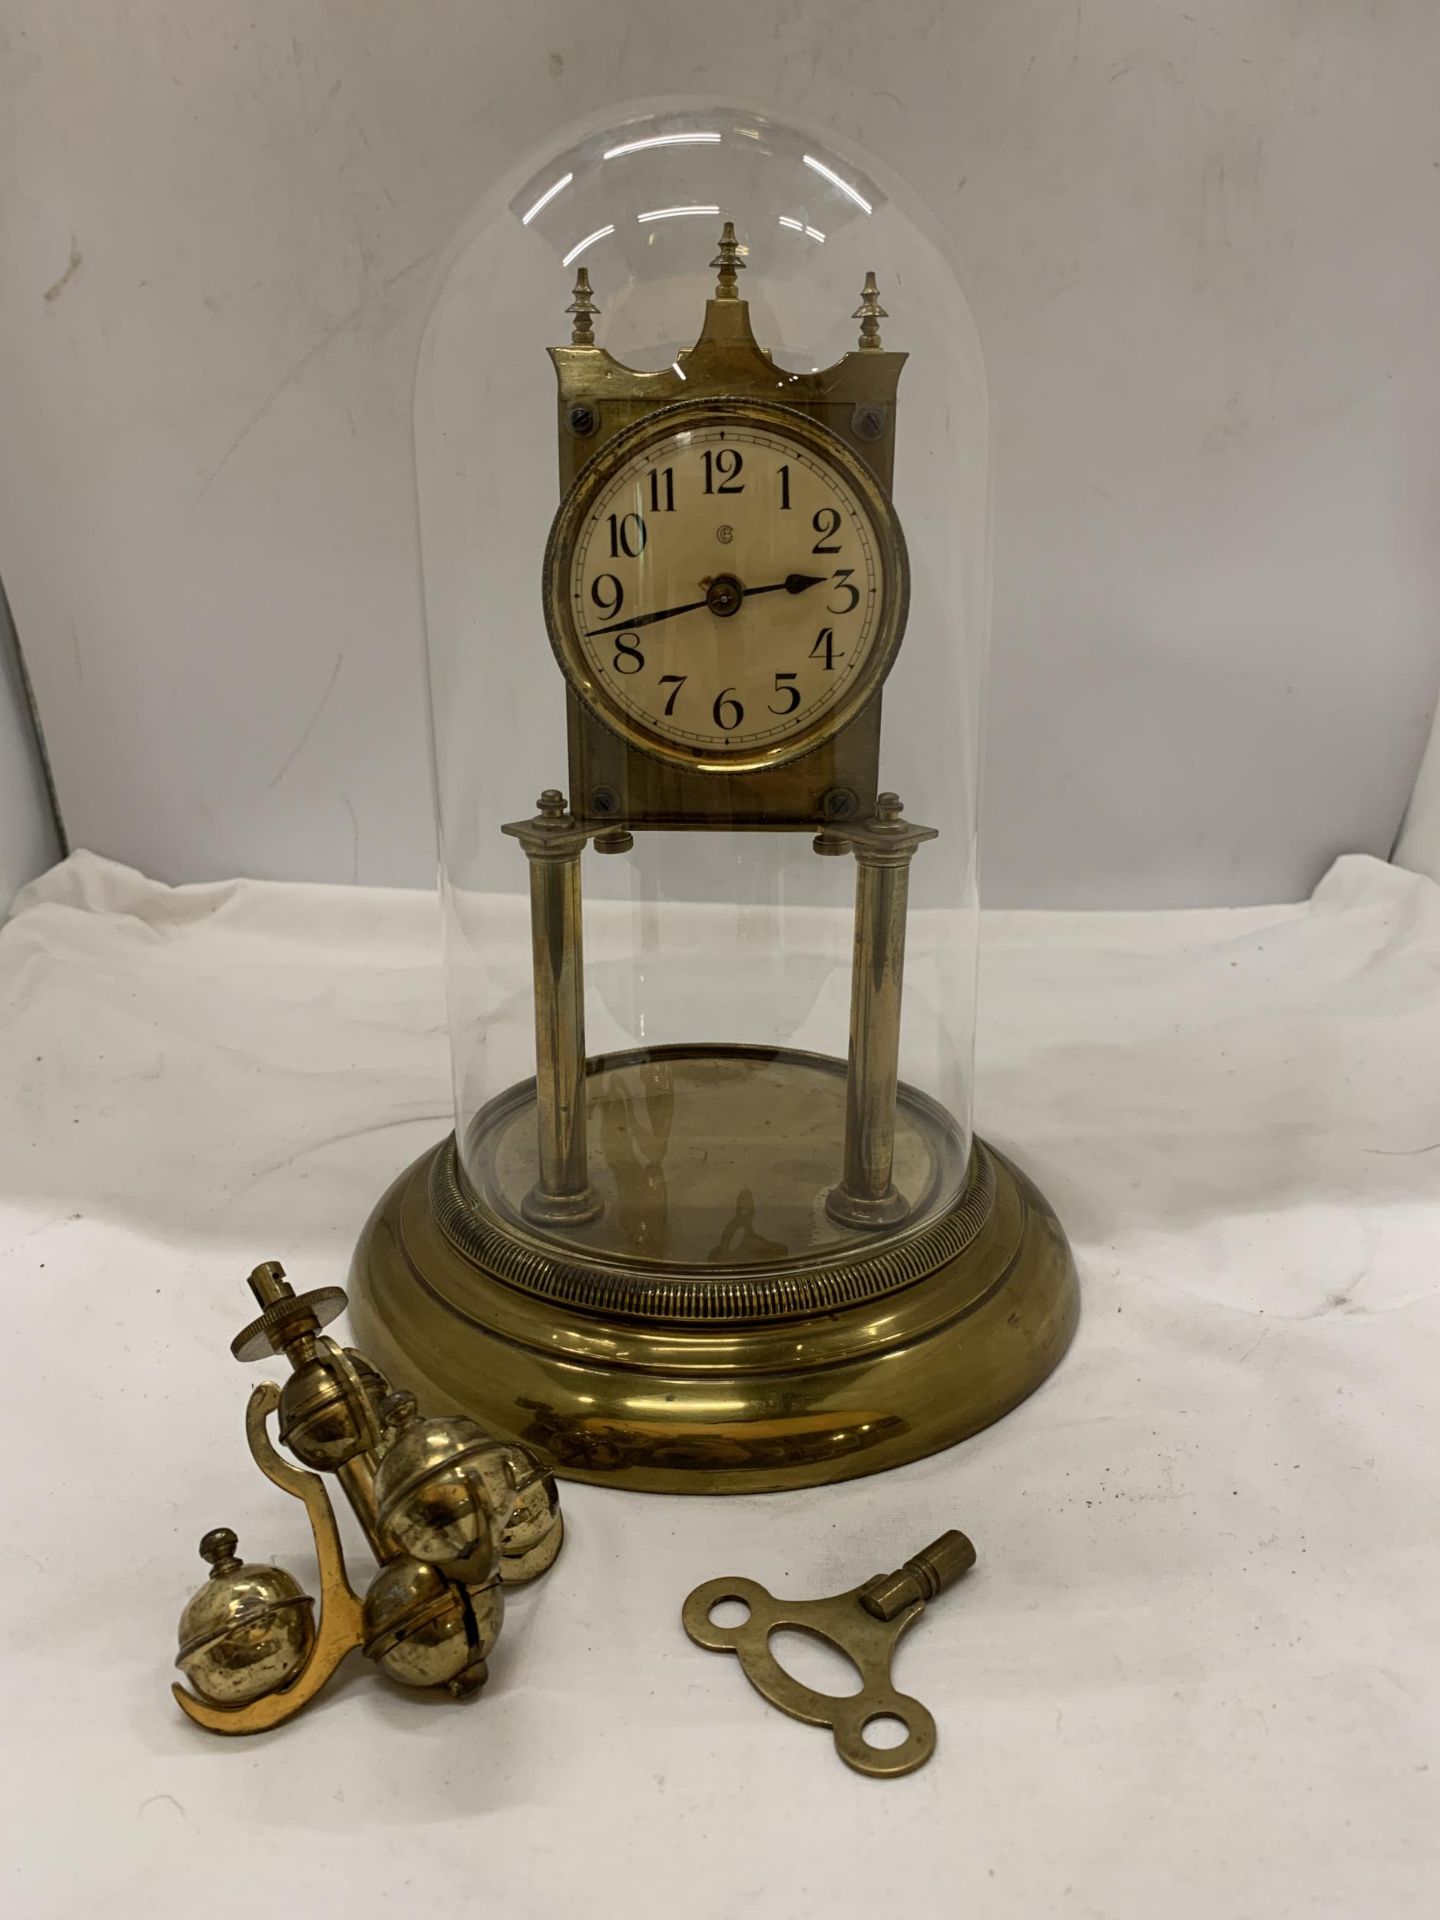 AN EARLY 20TH CENTURY ANNIVERSARY CLOCK WITH GLASS DOME - APPROXIMATELY 29CM